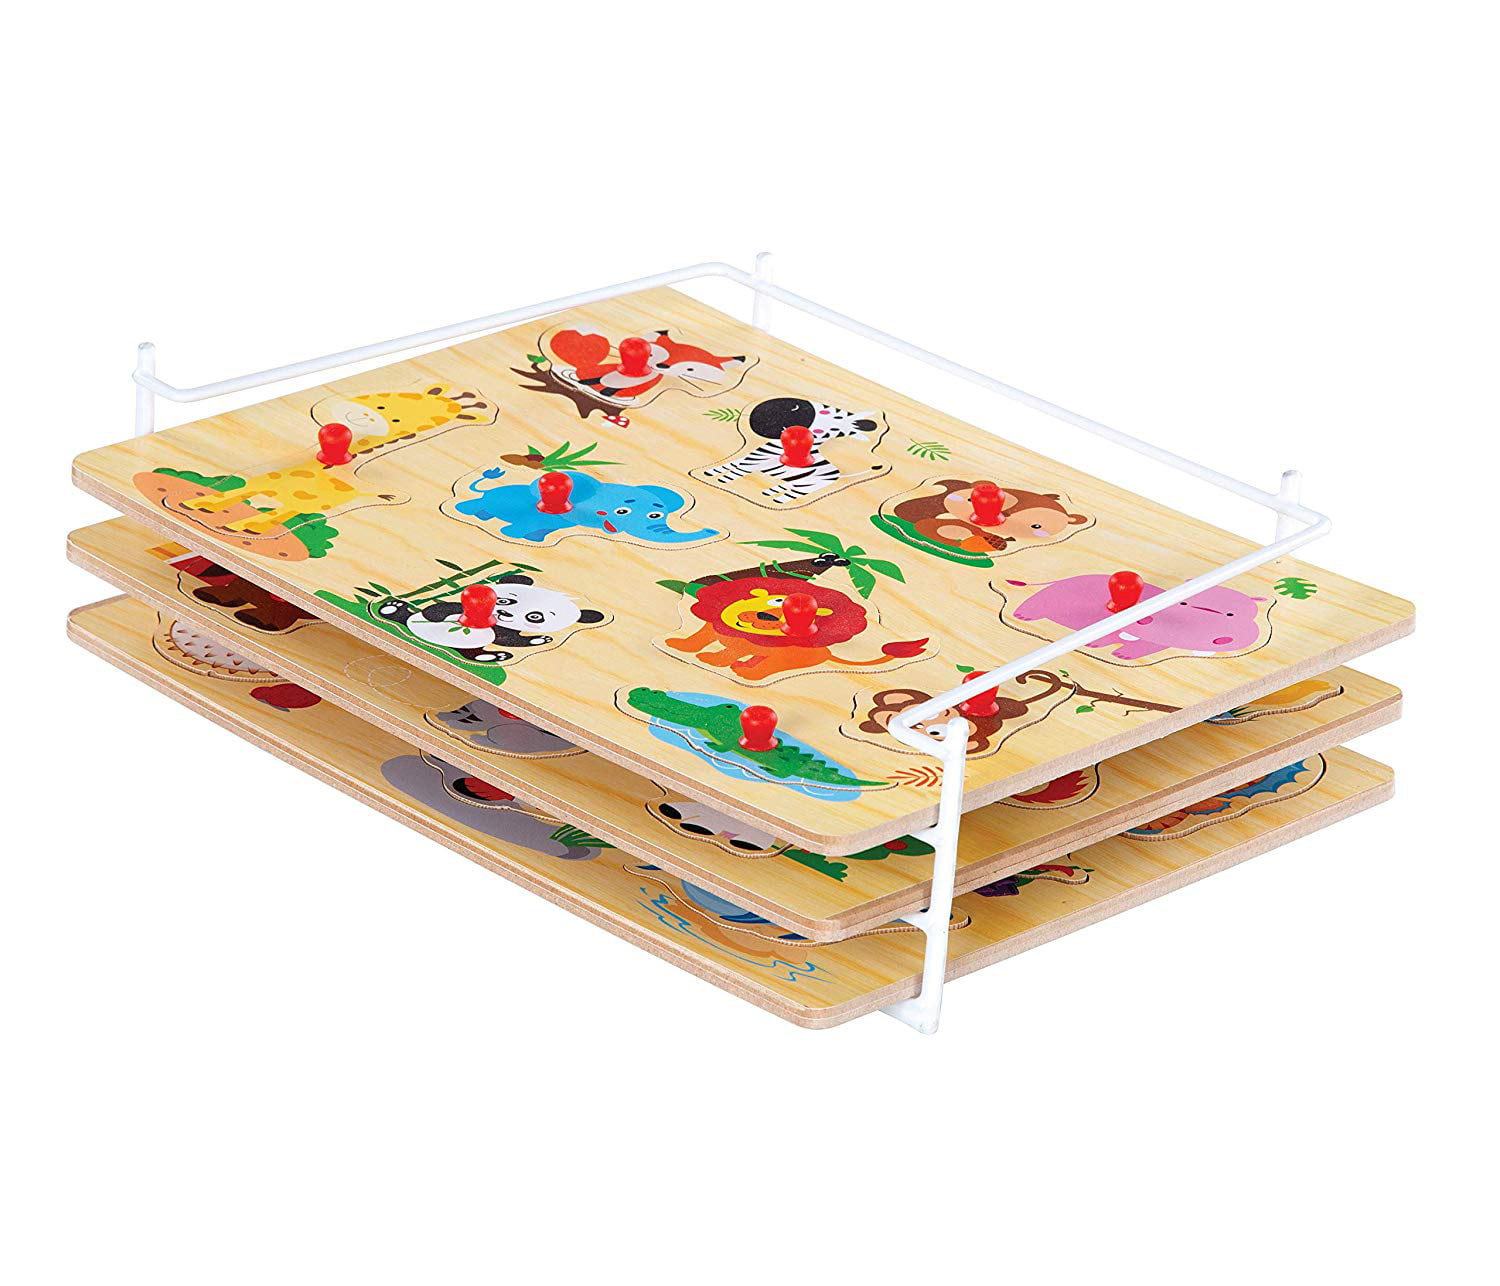 Wooden Puzzles For Toddlers by Etna Products – Colorful Peg Puzzles